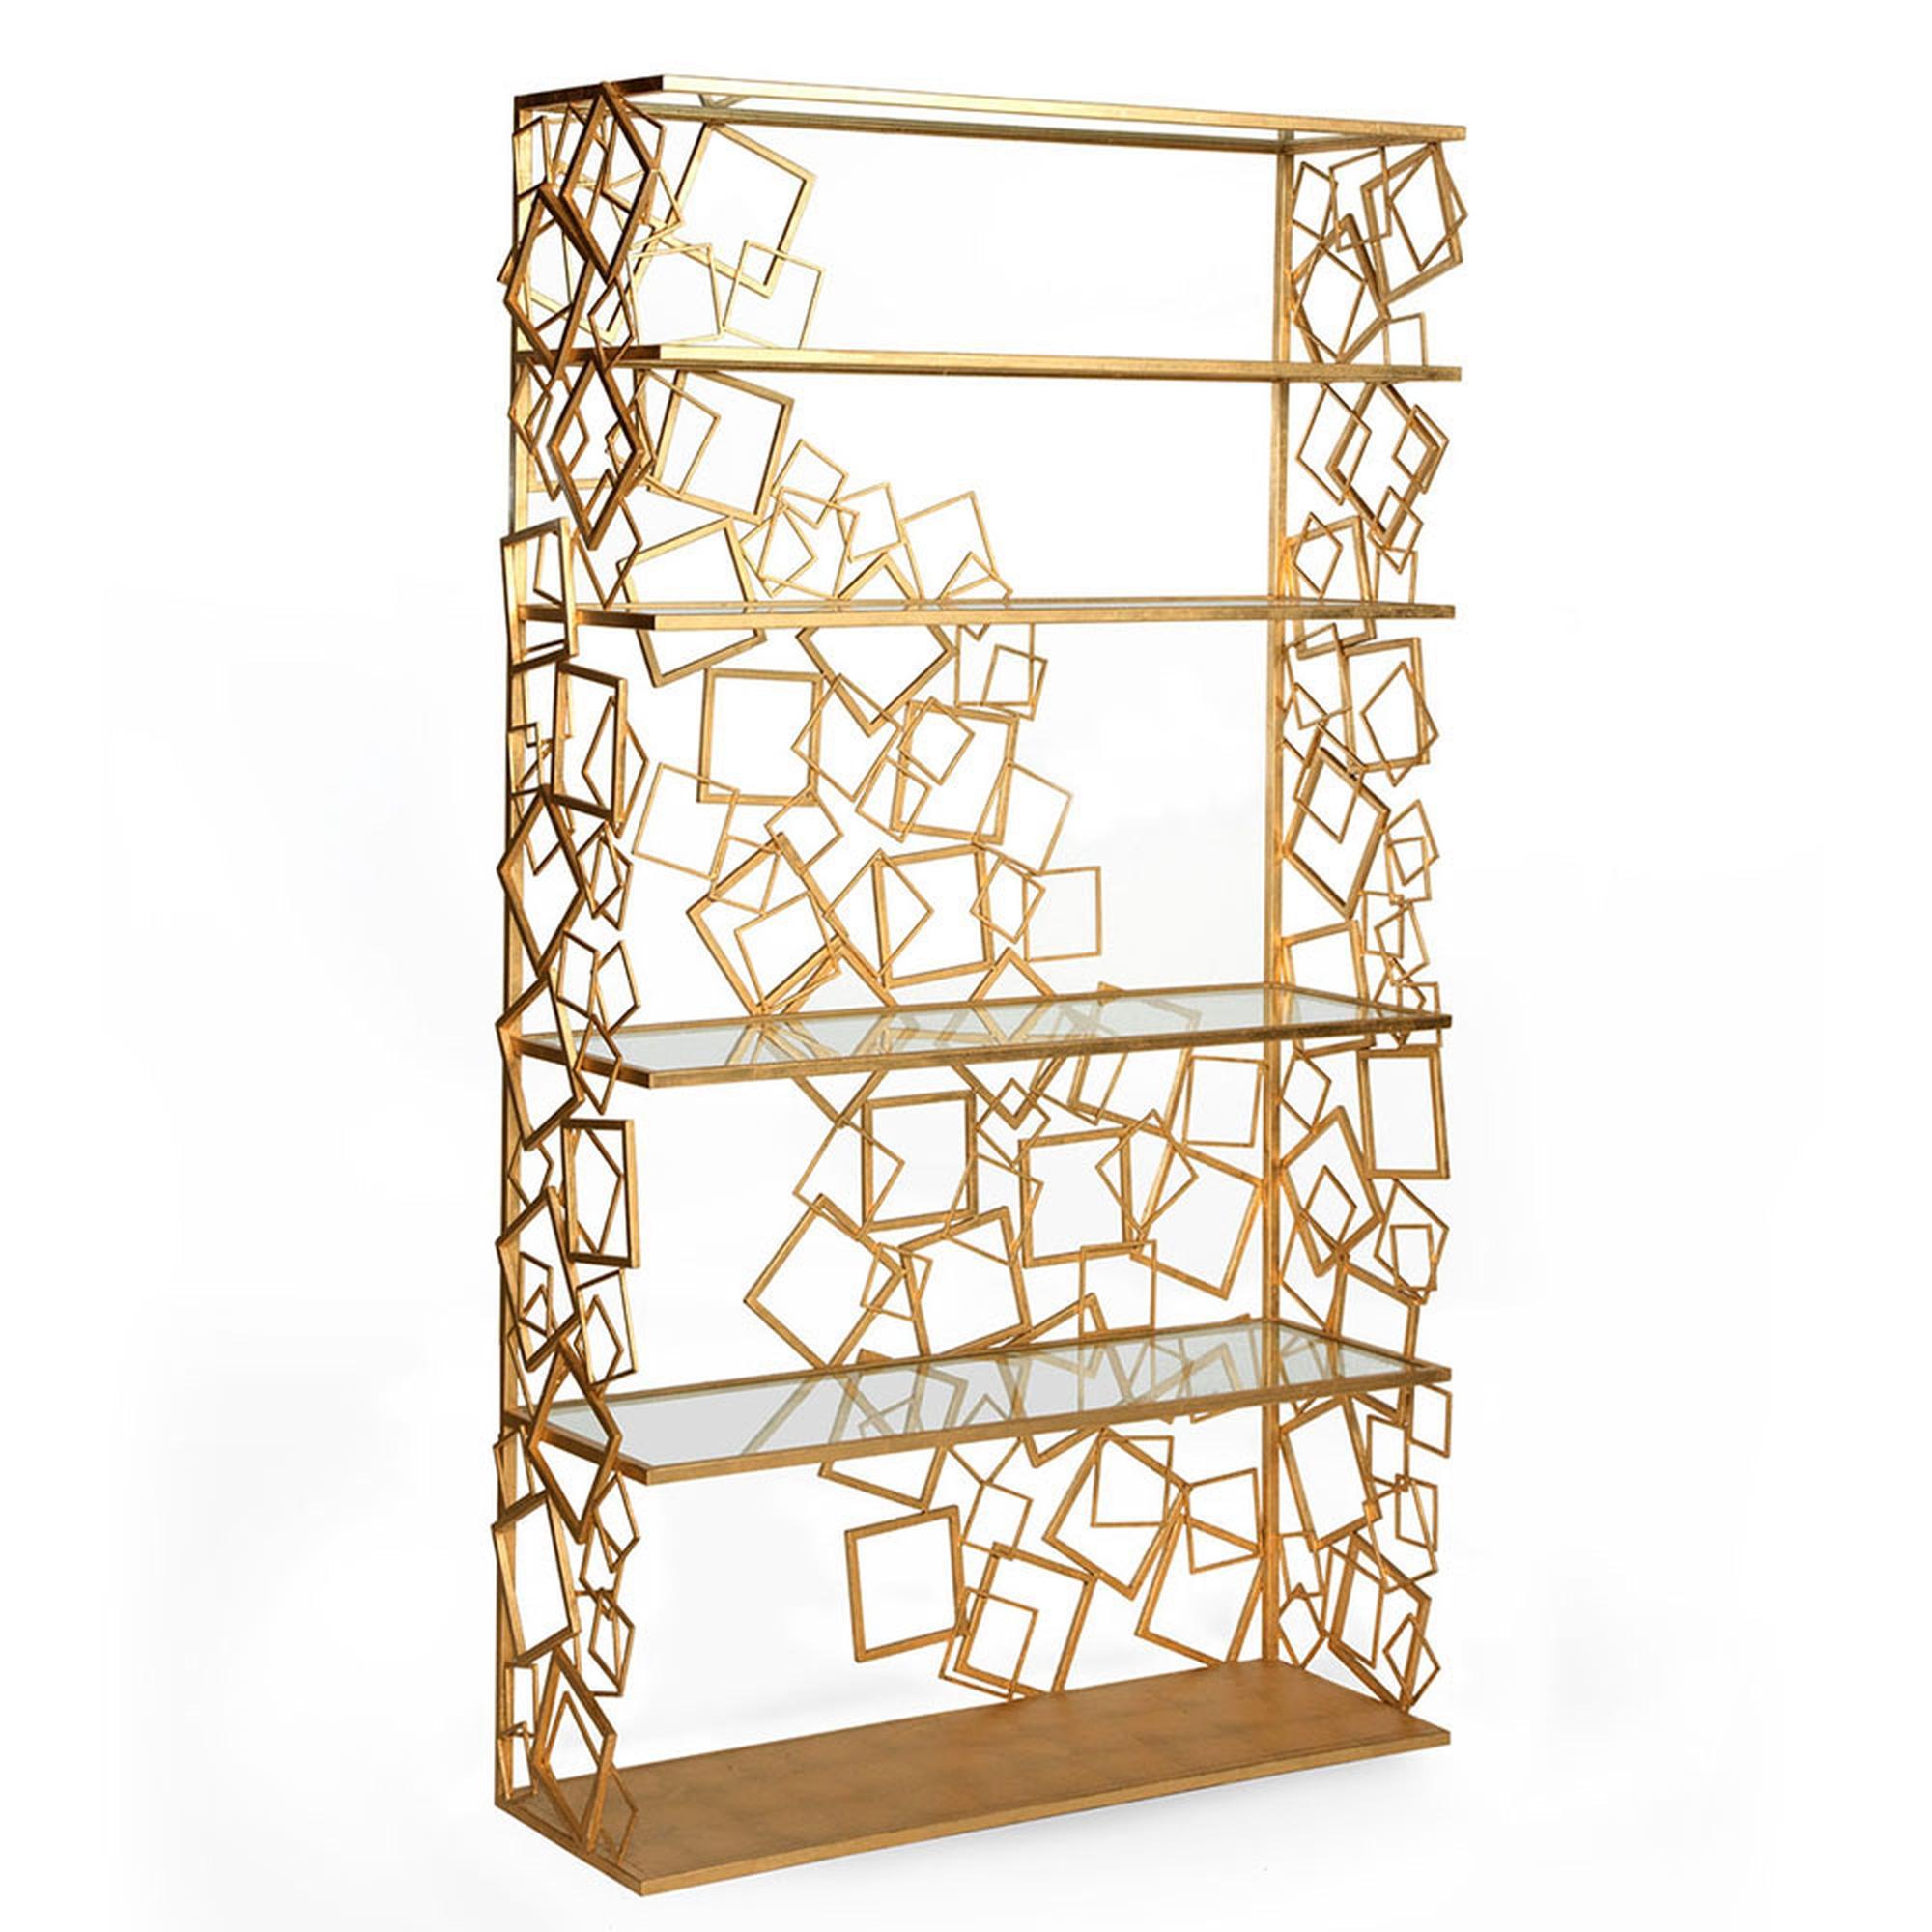 The Balboa étagère is an extravagant Old Hollywood era-inspired piece exuding glamour and sophistication. This elegantly designed statement bookshelf incorporates intricate frame detailing, stunning form, functionality, and quality. The frame is